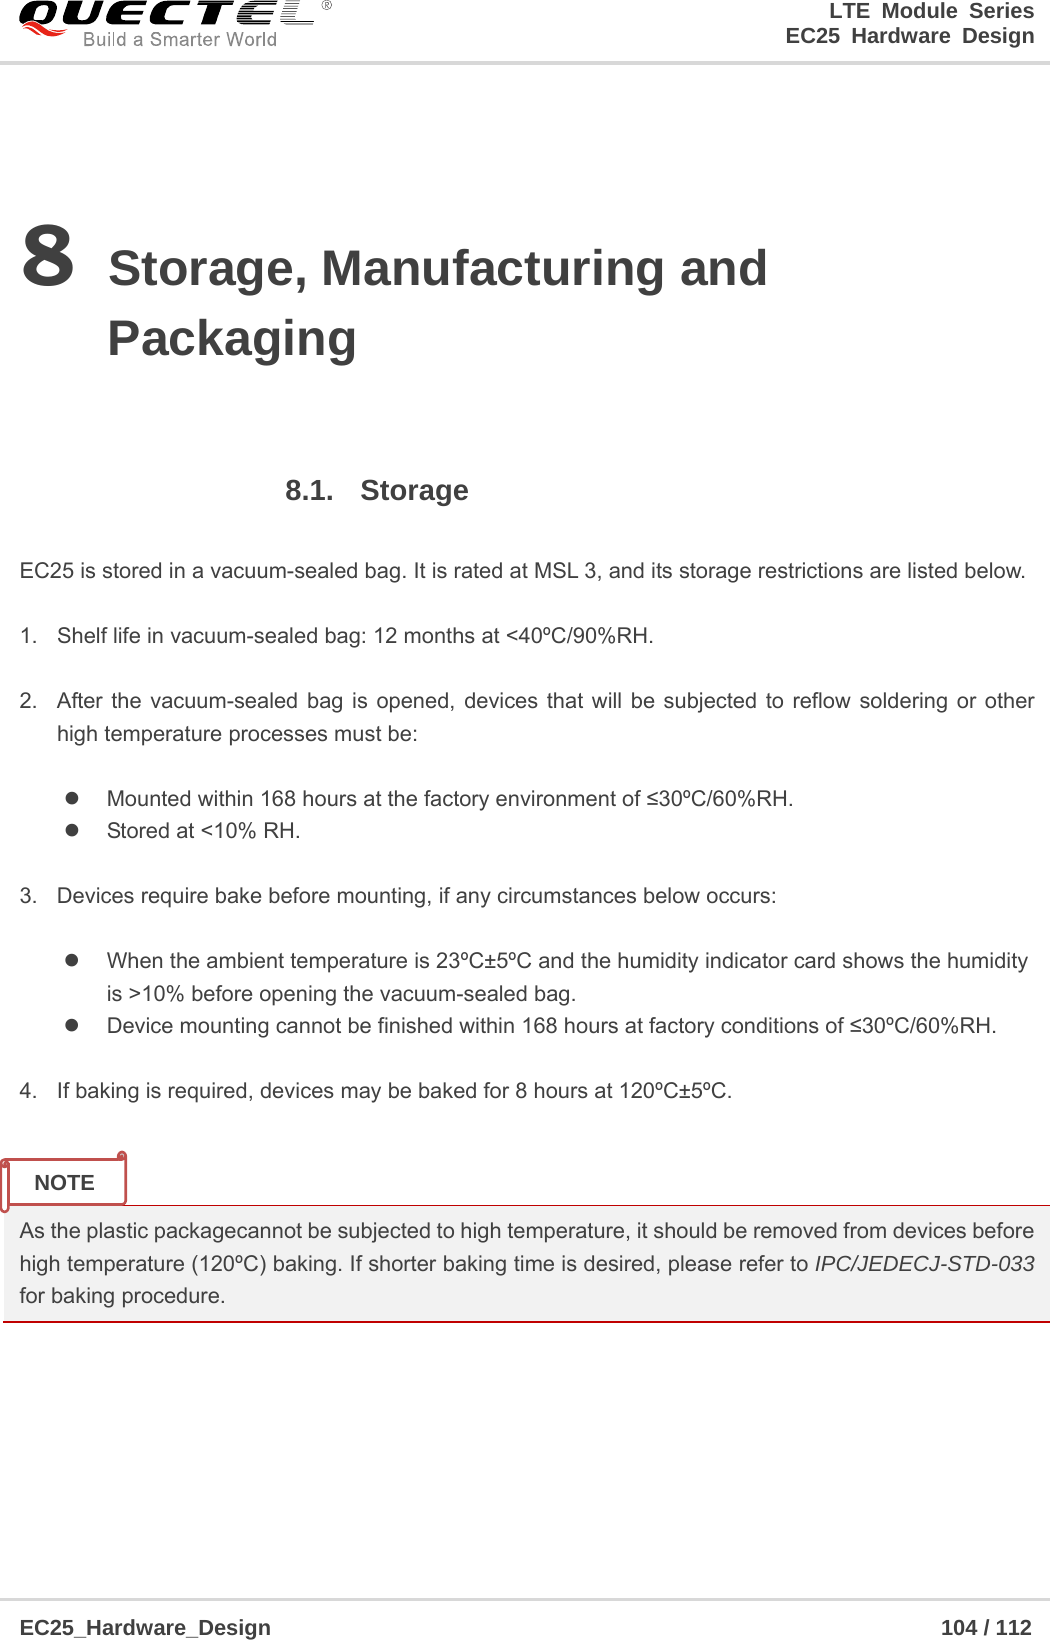 LTE Module Series                                                  EC25 Hardware Design  EC25_Hardware_Design                                                             104 / 112    8 Storage, Manufacturing and Packaging  8.1. Storage  EC25 is stored in a vacuum-sealed bag. It is rated at MSL 3, and its storage restrictions are listed below.    1.  Shelf life in vacuum-sealed bag: 12 months at &lt;40ºC/90%RH.    2.  After the vacuum-sealed bag is opened, devices that will be subjected to reflow soldering or other high temperature processes must be:    Mounted within 168 hours at the factory environment of ≤30ºC/60%RH.   Stored at &lt;10% RH.  3.  Devices require bake before mounting, if any circumstances below occurs:    When the ambient temperature is 23ºC±5ºC and the humidity indicator card shows the humidity           is &gt;10% before opening the vacuum-sealed bag.   Device mounting cannot be finished within 168 hours at factory conditions of ≤30ºC/60%RH.  4.  If baking is required, devices may be baked for 8 hours at 120ºC±5ºC.   As the plastic packagecannot be subjected to high temperature, it should be removed from devices before high temperature (120ºC) baking. If shorter baking time is desired, please refer to IPC/JEDECJ-STD-033 for baking procedure.      NOTE 